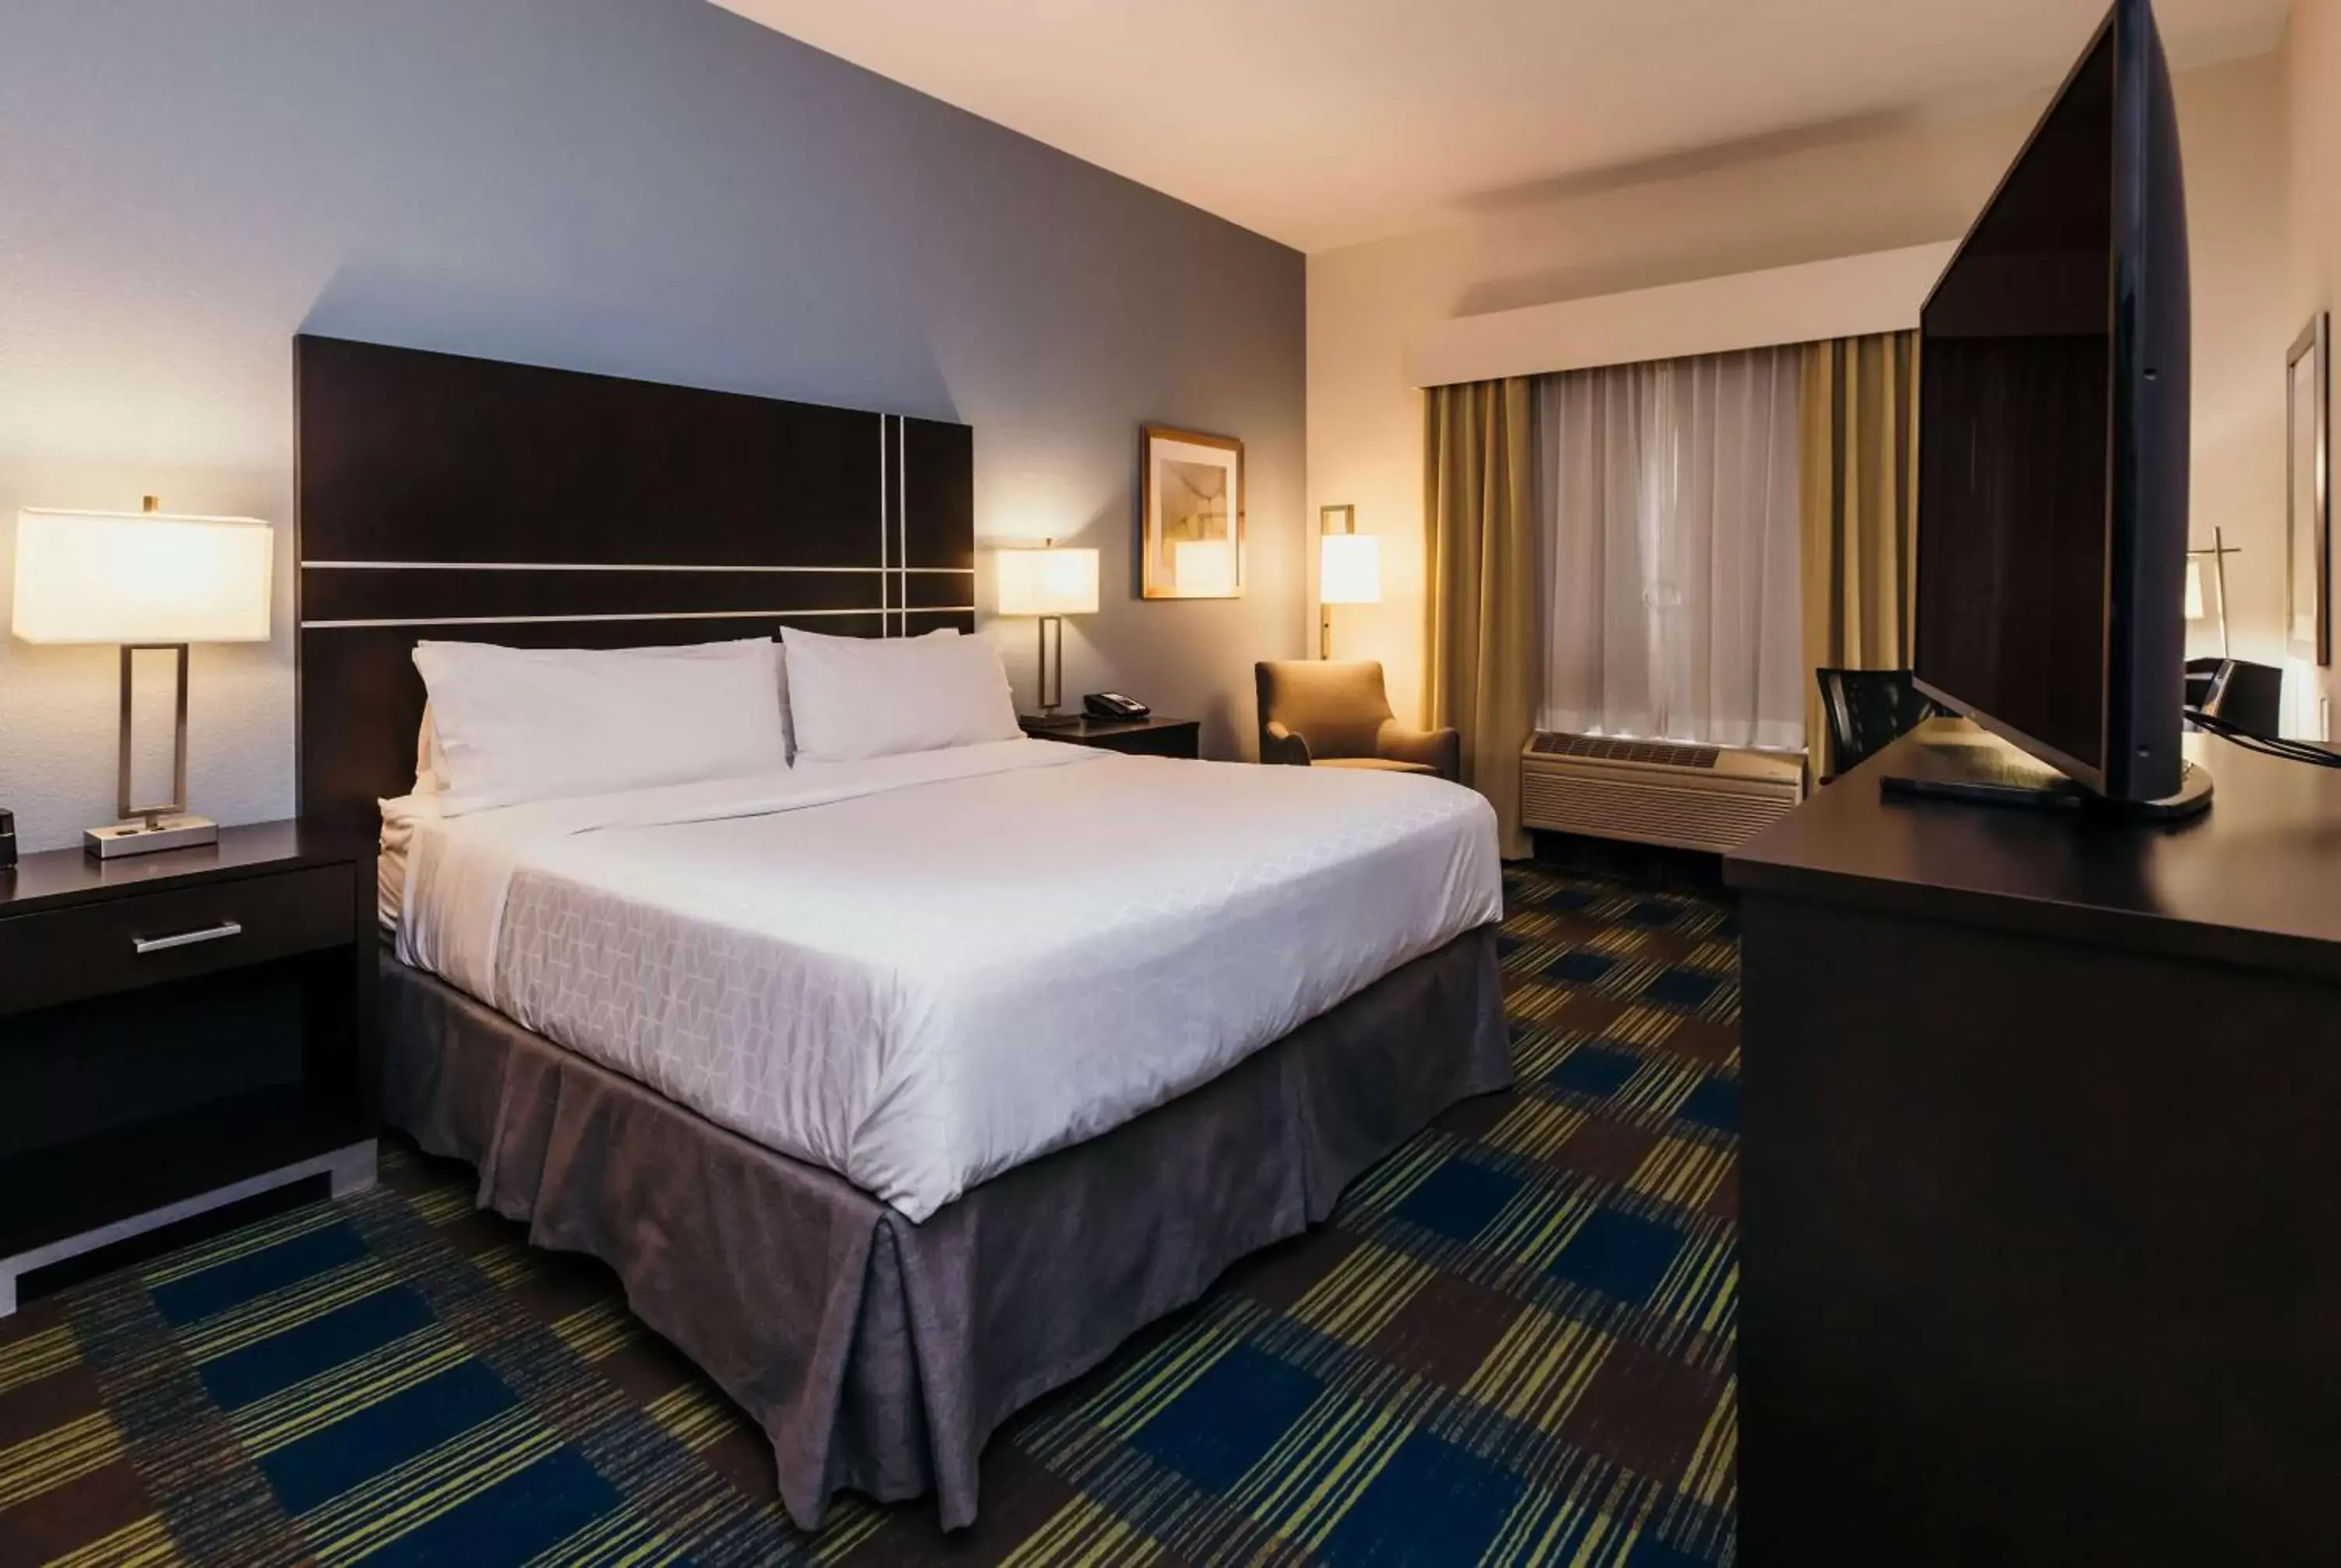 King Room - Non-Smoking in La Quinta Inn & Suites by Wyndham Ankeny IA - Des Moines IA